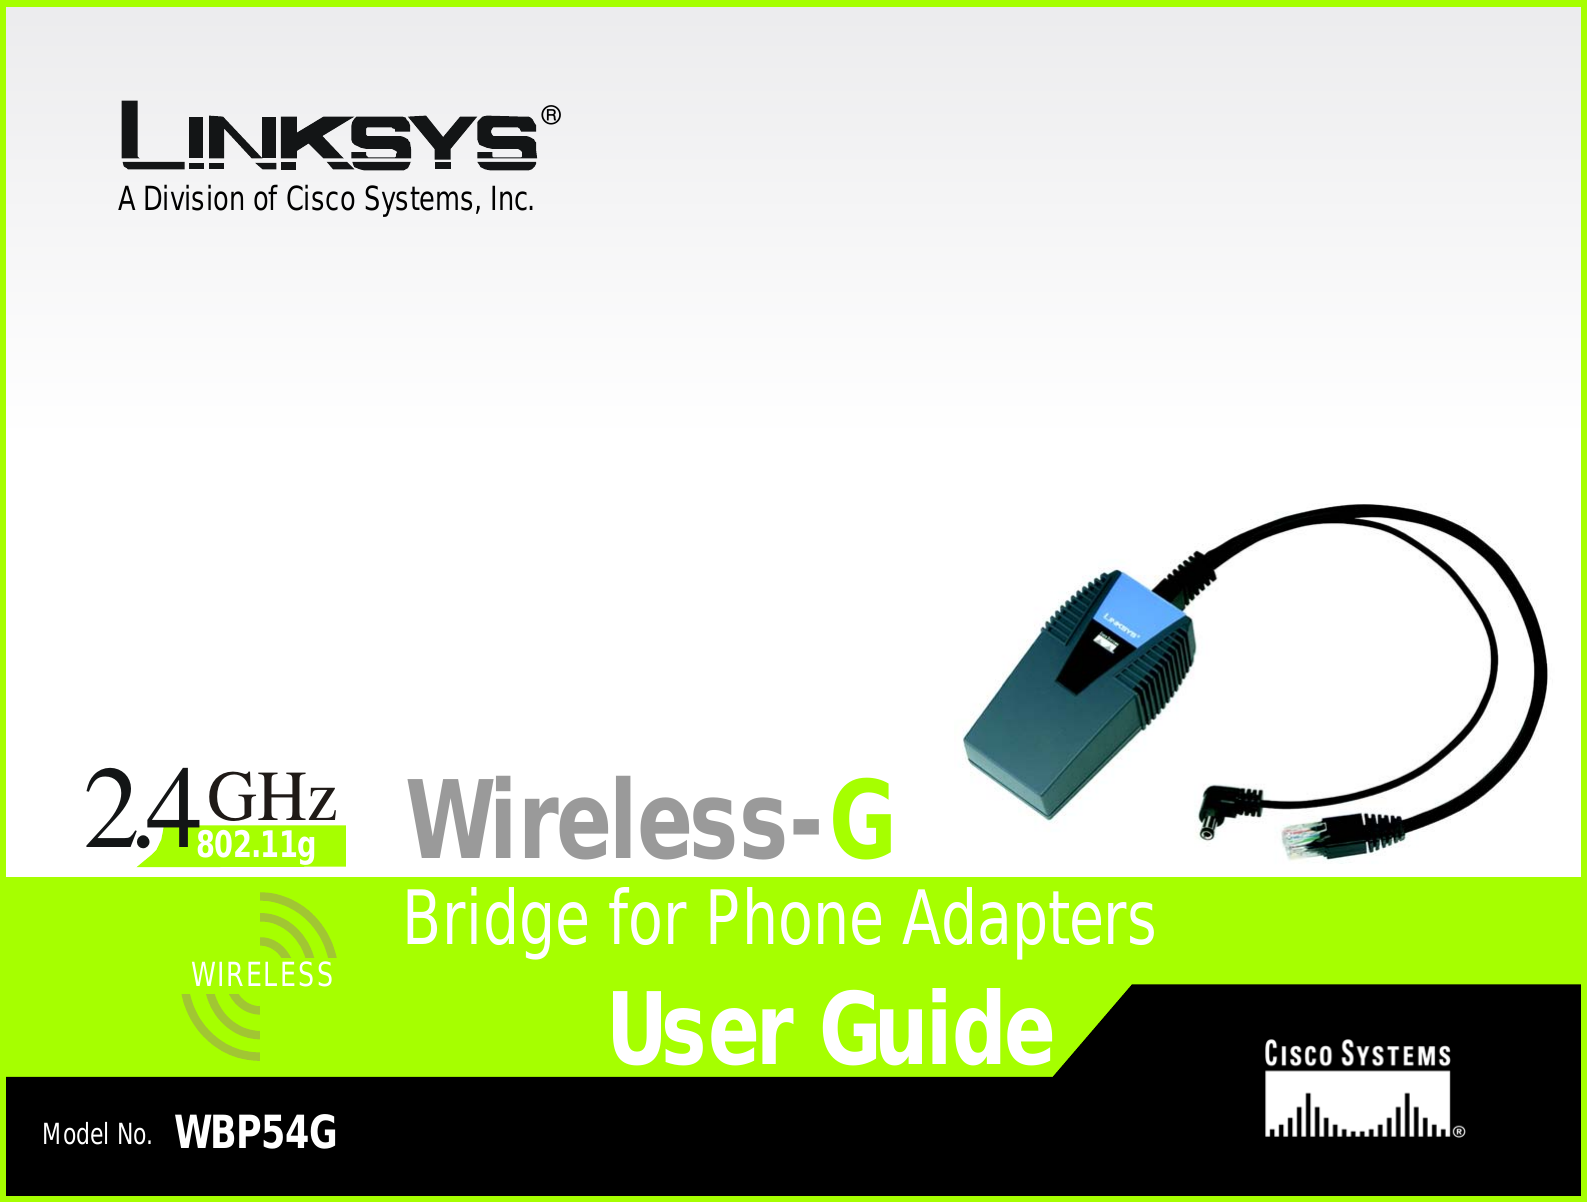 A Division of Cisco Systems, Inc.®Model No.Bridge for Phone AdaptersWireless-GWBP54G User GuideWIRELESSGHz2.4802.11g